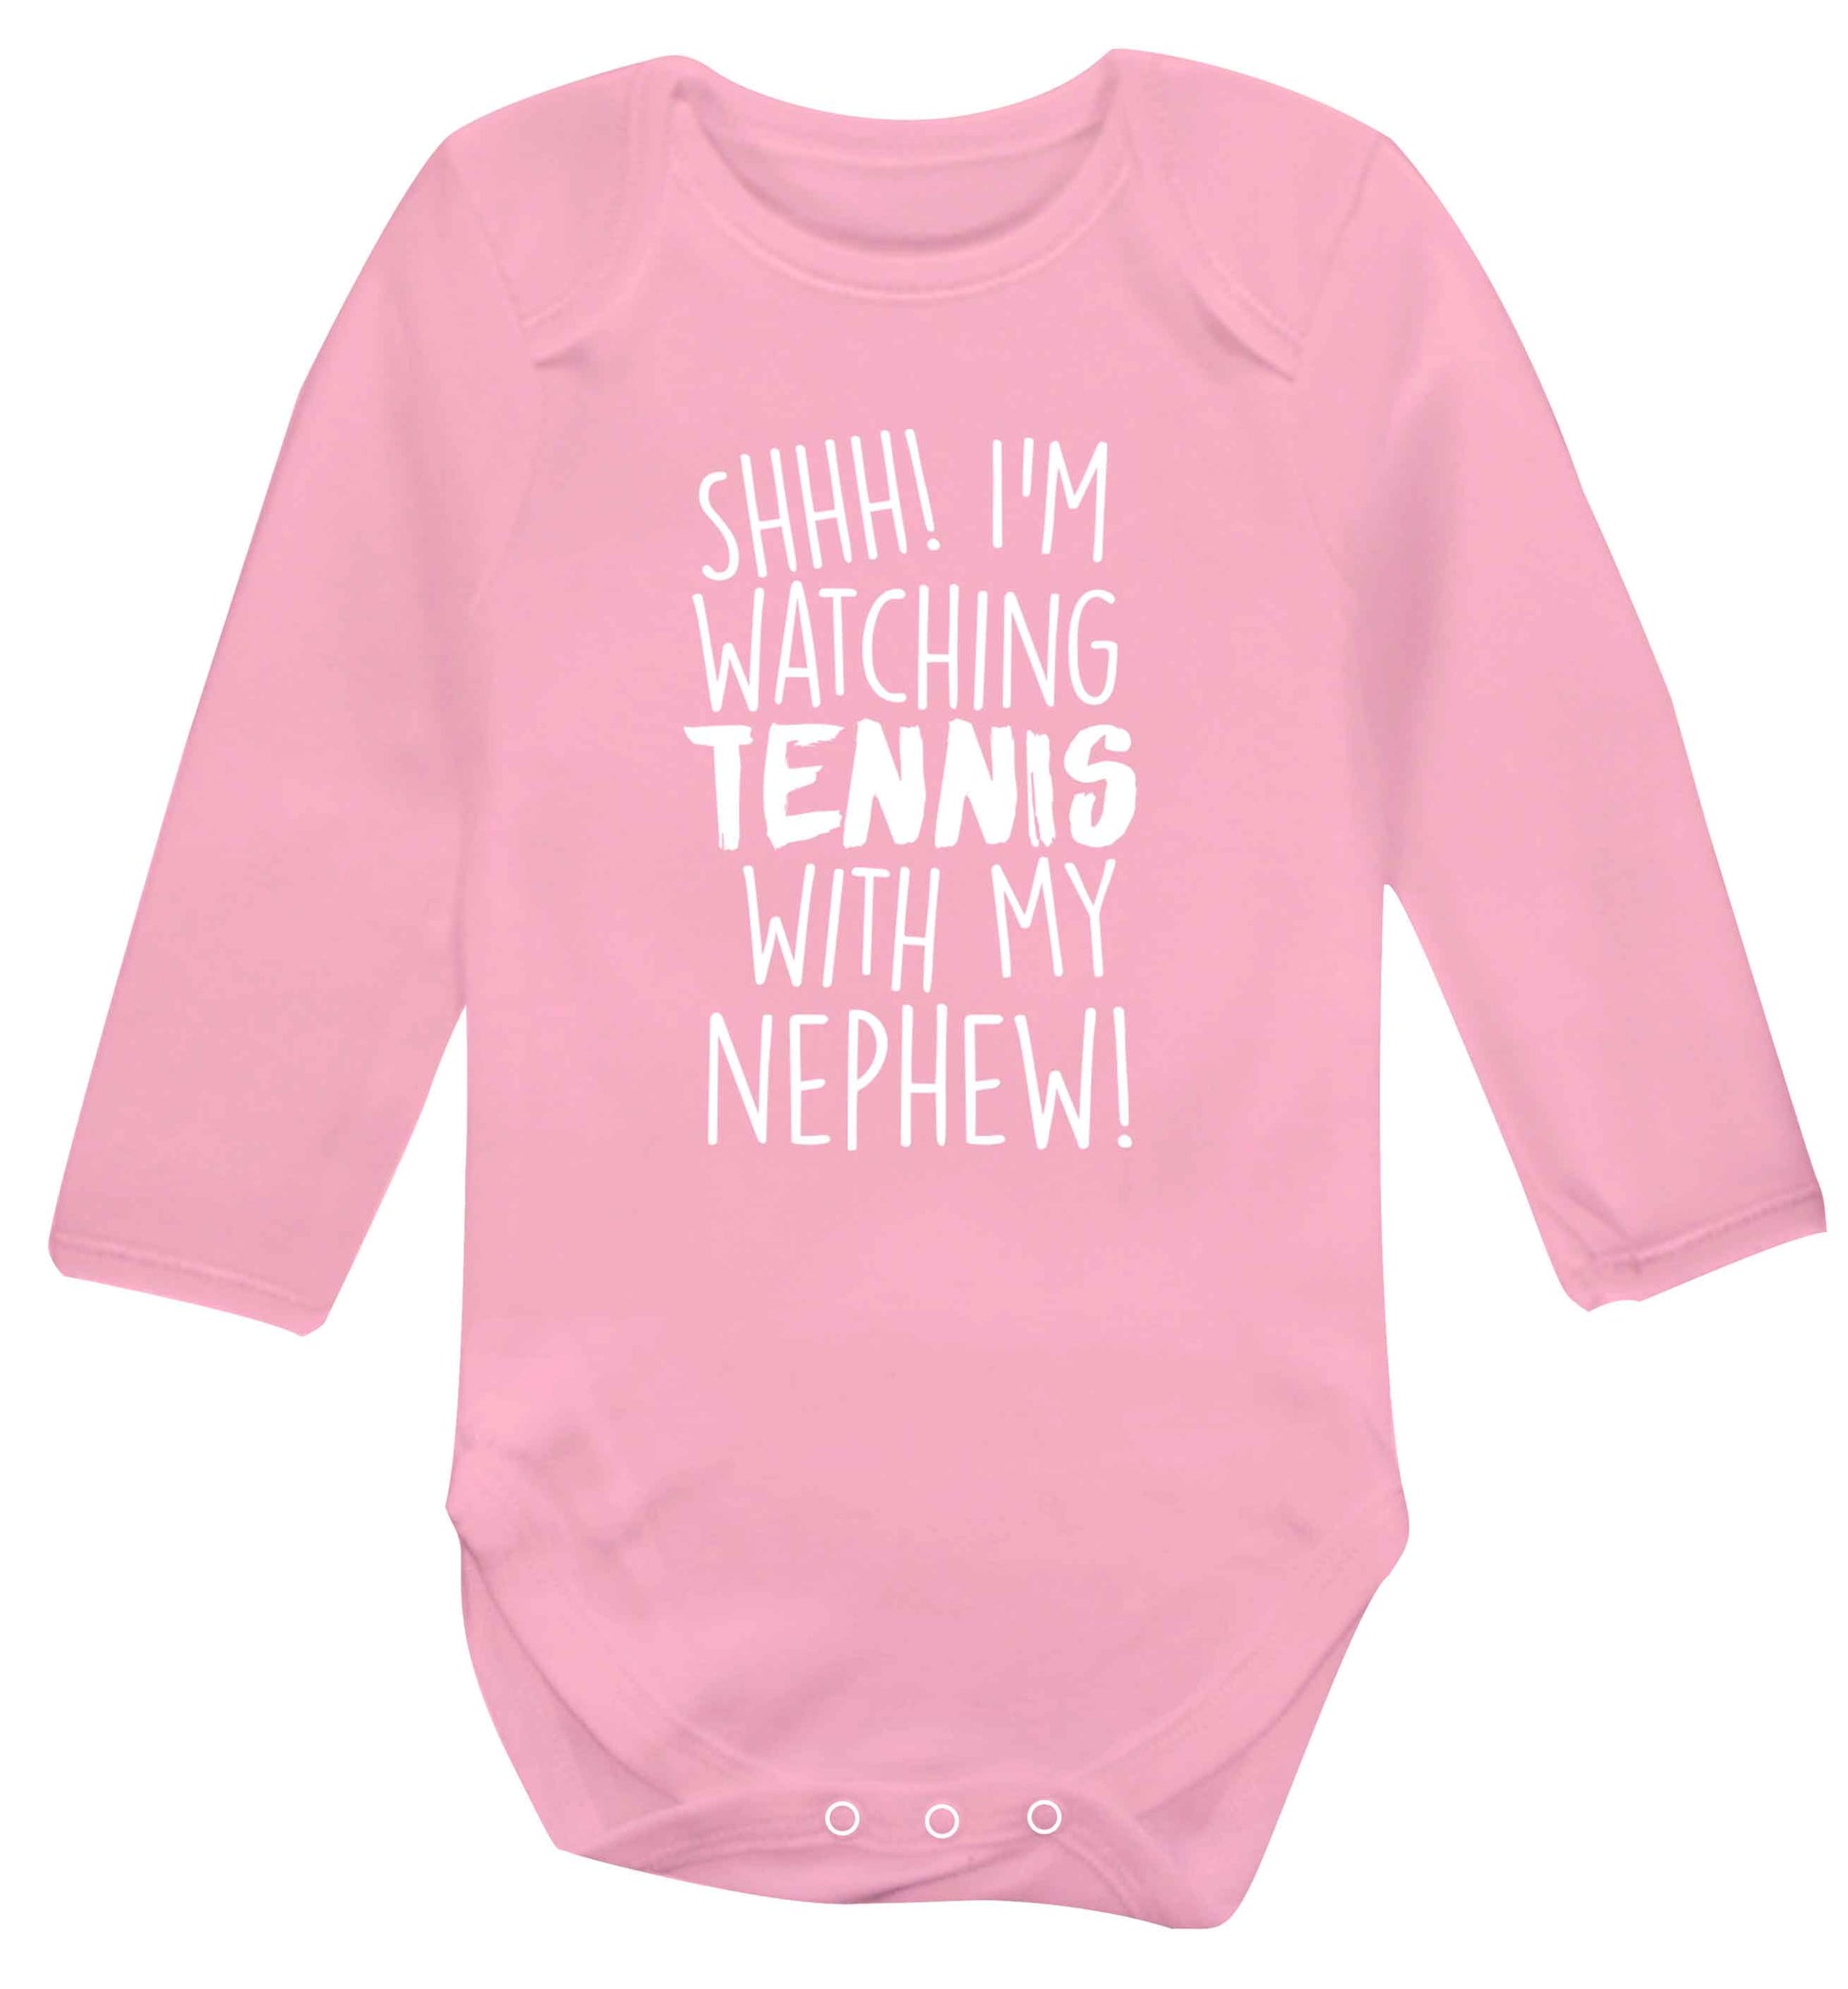 Shh! I'm watching tennis with my nephew! Baby Vest long sleeved pale pink 6-12 months